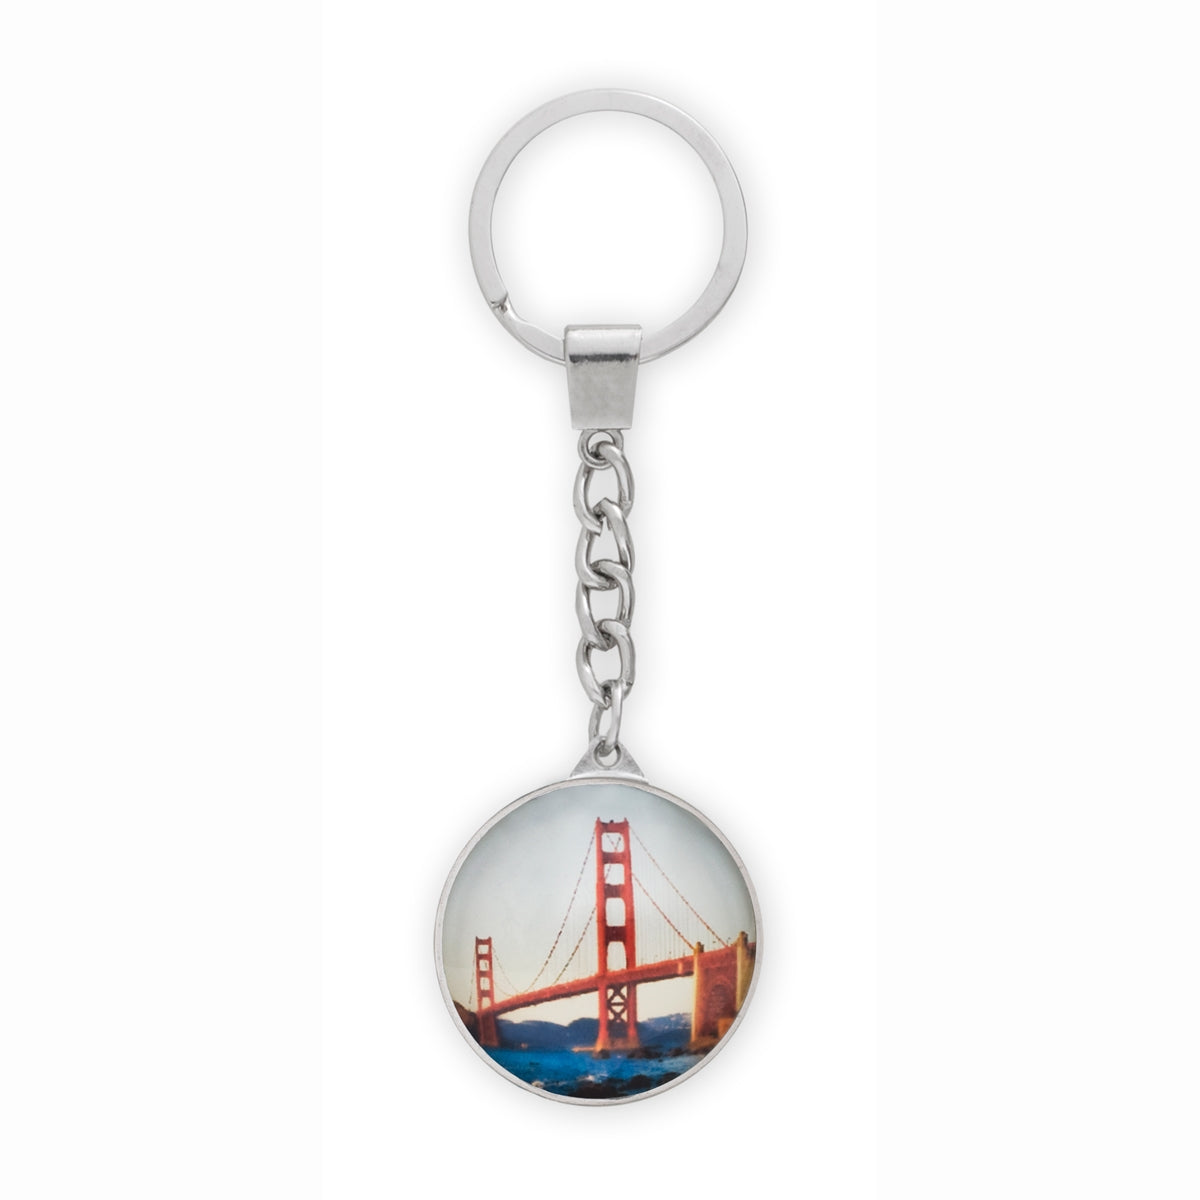 Multicolor Golden Gate Bridge crystal keychain with Art Deco bridge tower design and photo of span.